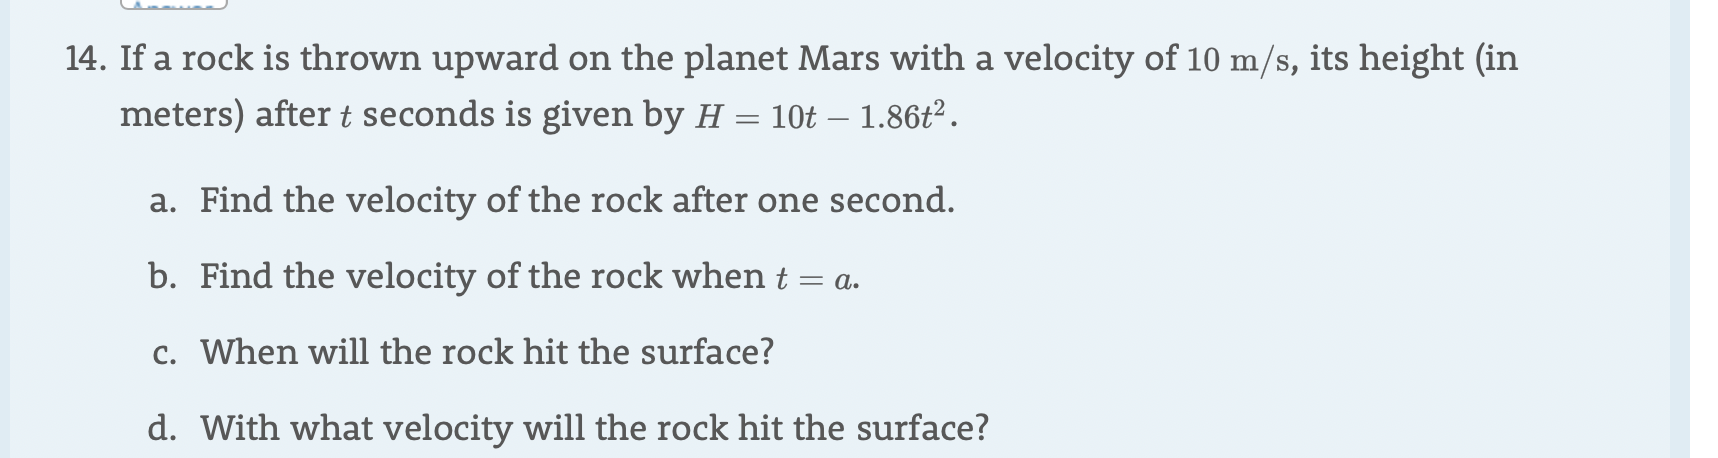 14. If a rock is thrown upward
on the planet Mars with a velocity of 10 m/s, its height (in
meters) after t seconds is given by H = 10t - 1.86t2
a. Find the velocity of the rock after one second.
b. Find the velocity of the rock when t = a.
c. When will the rock hit the surface?
d. With what velocity will the rock hit the surface?
